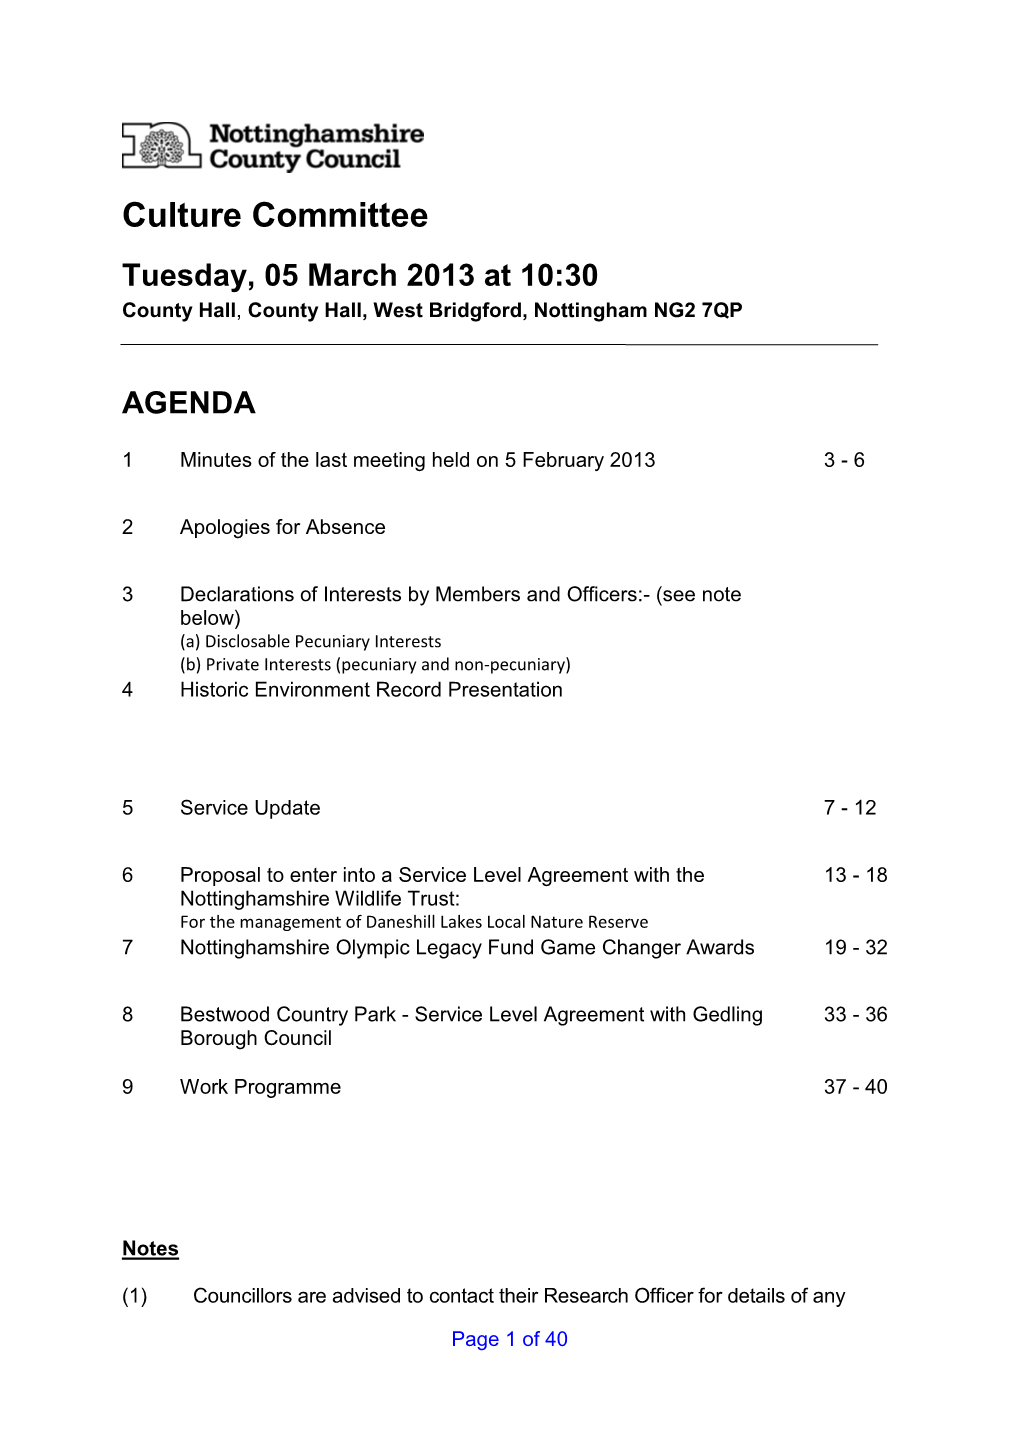 Culture Committee Tuesday, 05 March 2013 at 10:30 County Hall , County Hall, West Bridgford, Nottingham NG2 7QP